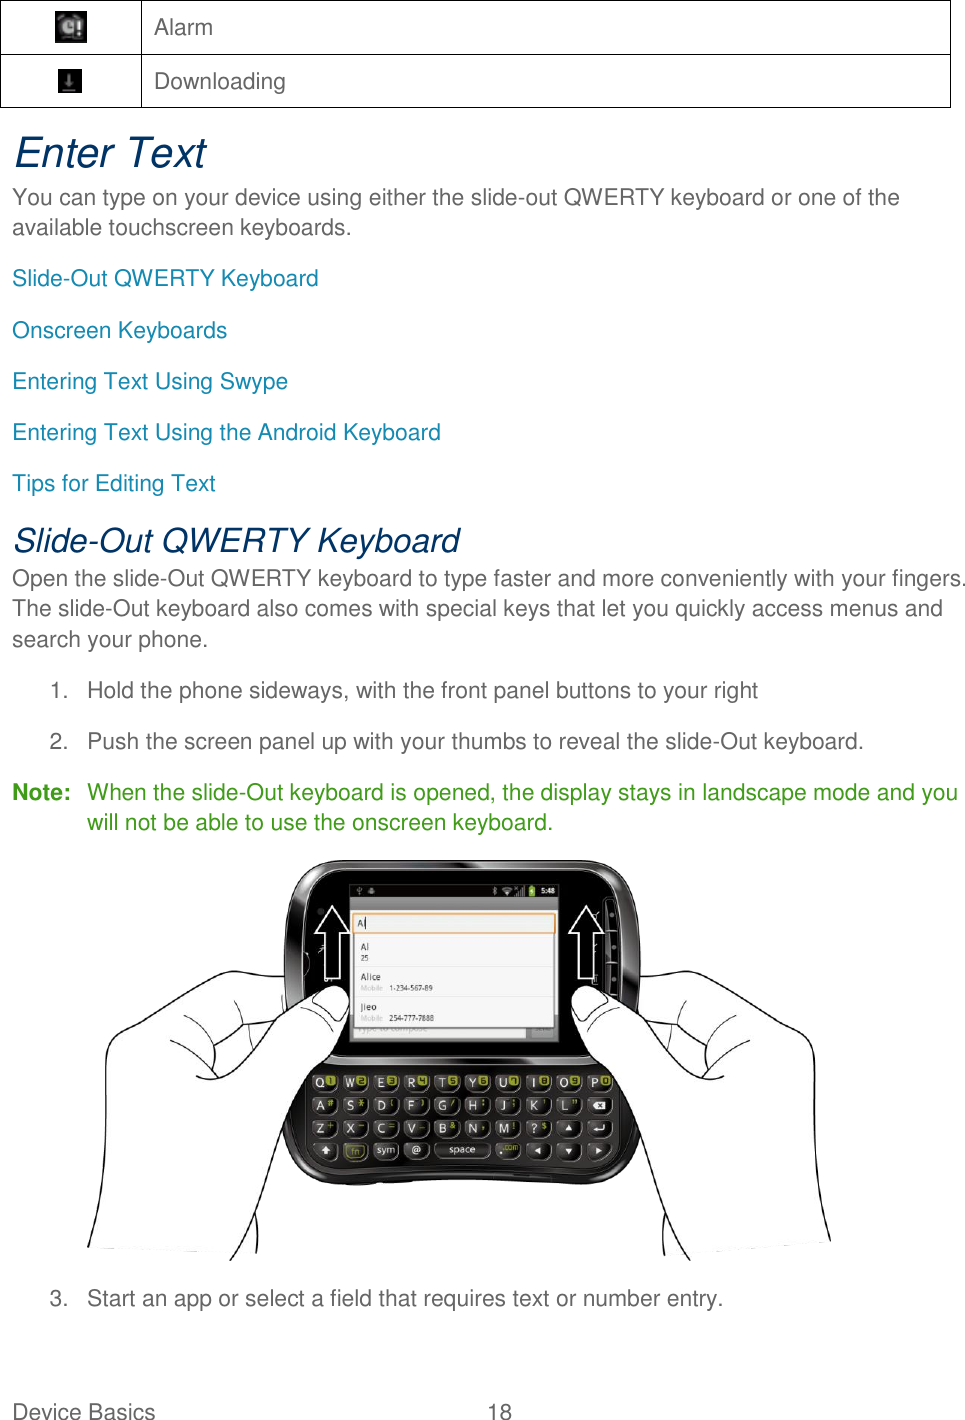 Device Basics  18    Alarm  Downloading Enter Text You can type on your device using either the slide-out QWERTY keyboard or one of the available touchscreen keyboards. Slide-Out QWERTY Keyboard Onscreen Keyboards Entering Text Using Swype Entering Text Using the Android Keyboard Tips for Editing Text Slide-Out QWERTY Keyboard Open the slide-Out QWERTY keyboard to type faster and more conveniently with your fingers. The slide-Out keyboard also comes with special keys that let you quickly access menus and search your phone. 1.  Hold the phone sideways, with the front panel buttons to your right 2.  Push the screen panel up with your thumbs to reveal the slide-Out keyboard. Note:  When the slide-Out keyboard is opened, the display stays in landscape mode and you will not be able to use the onscreen keyboard.  3.  Start an app or select a field that requires text or number entry. 